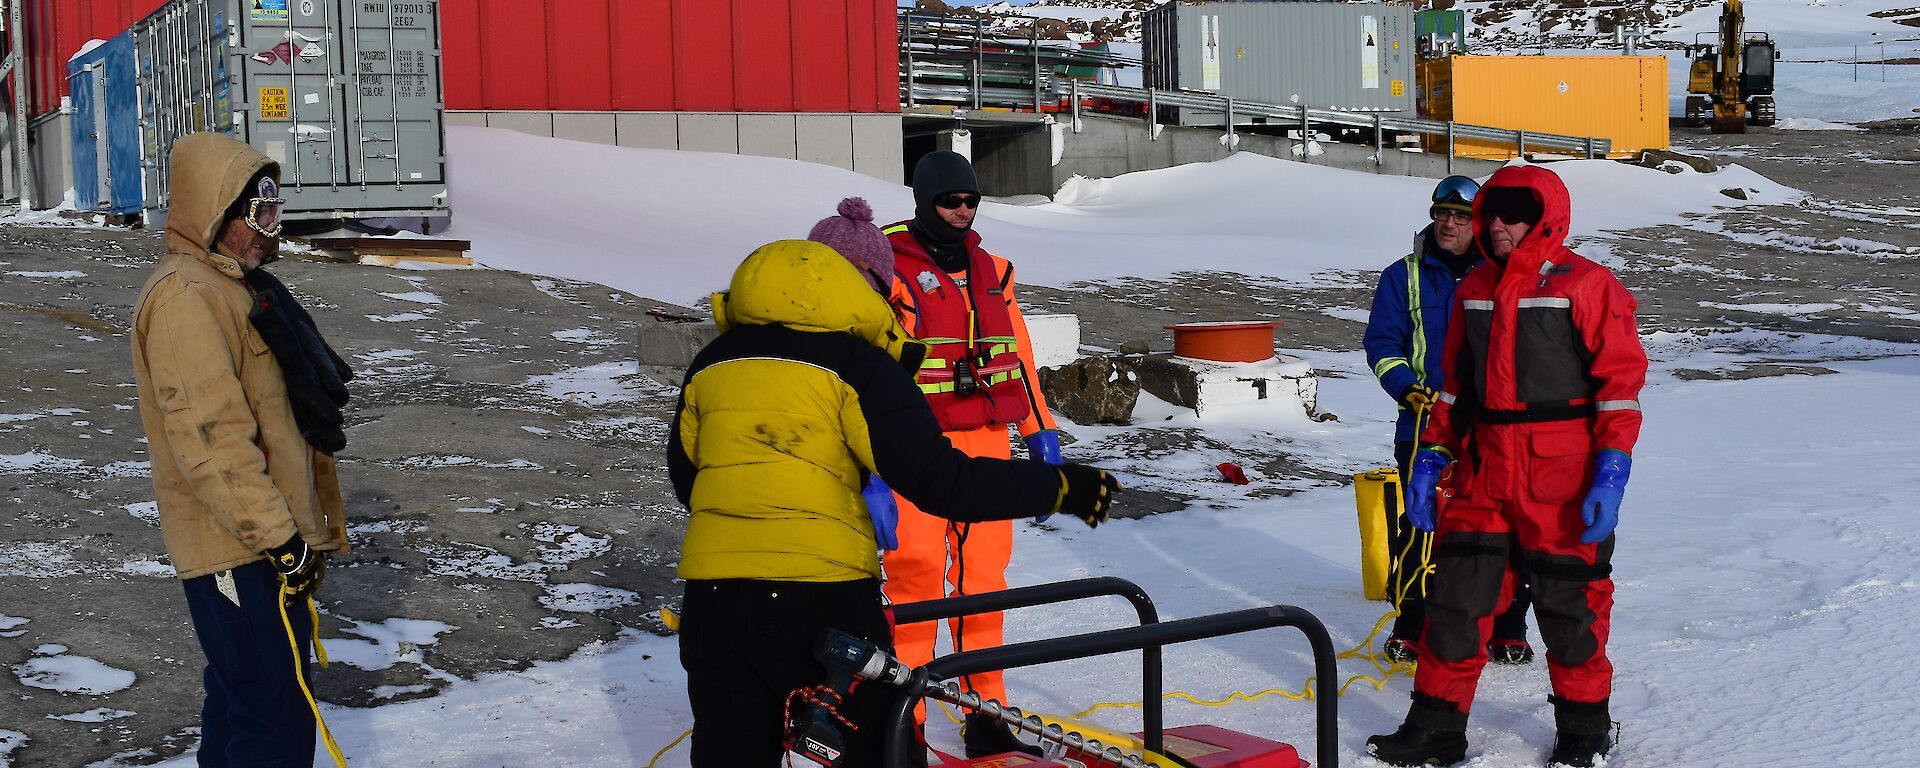 a man in an orange immersion suit stands in front of a rescue platform, while expeditioners prepare the ropes